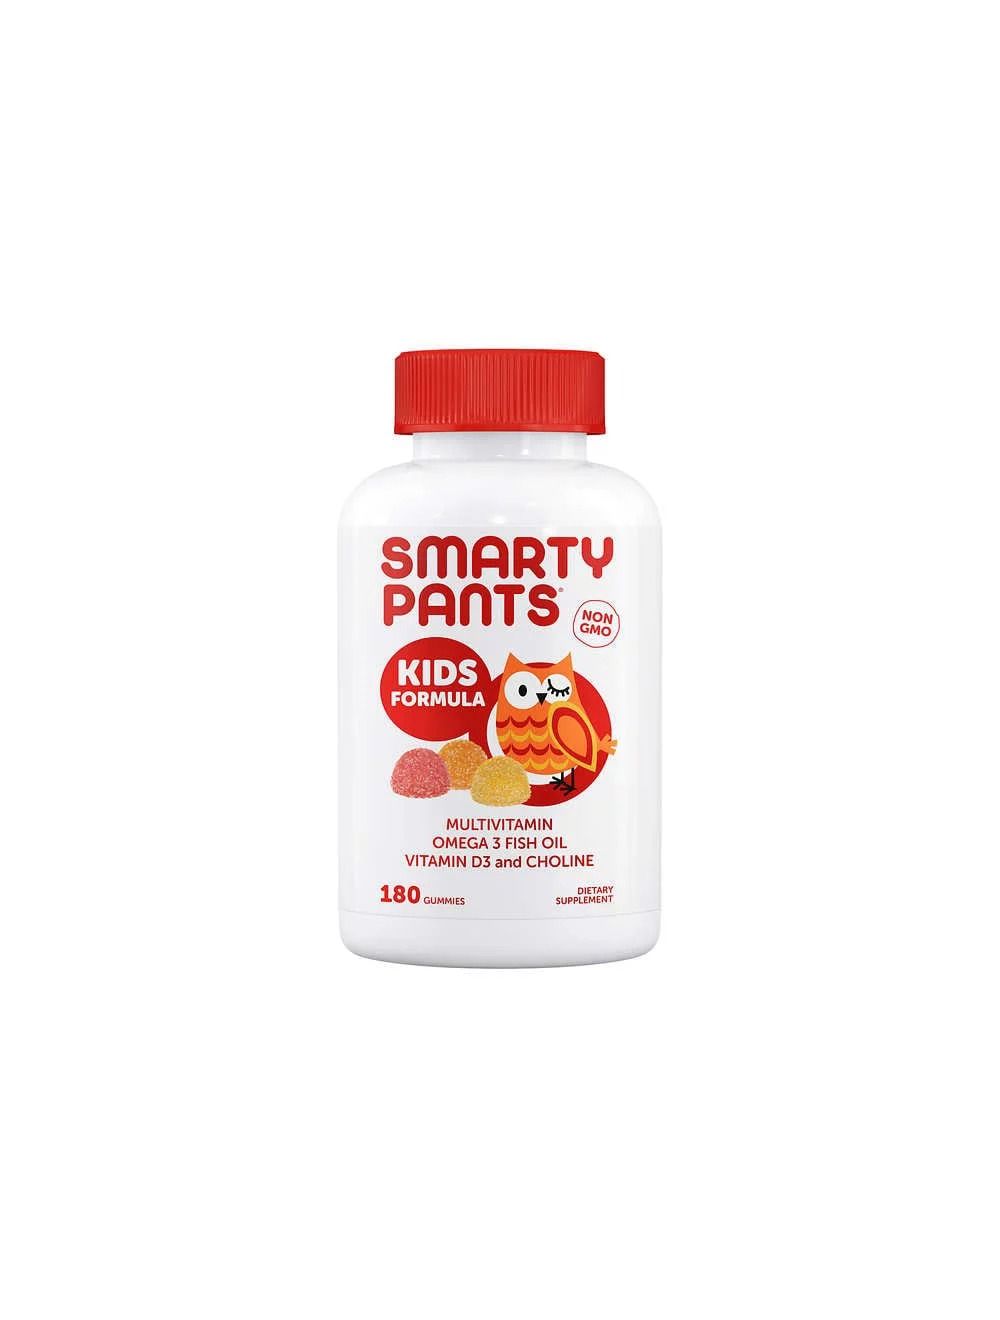 Smarty Pants Daily Multivitamin 30.0 Servings (Pack of 1),  Yellow/Orange/Red - Helia Beer Co